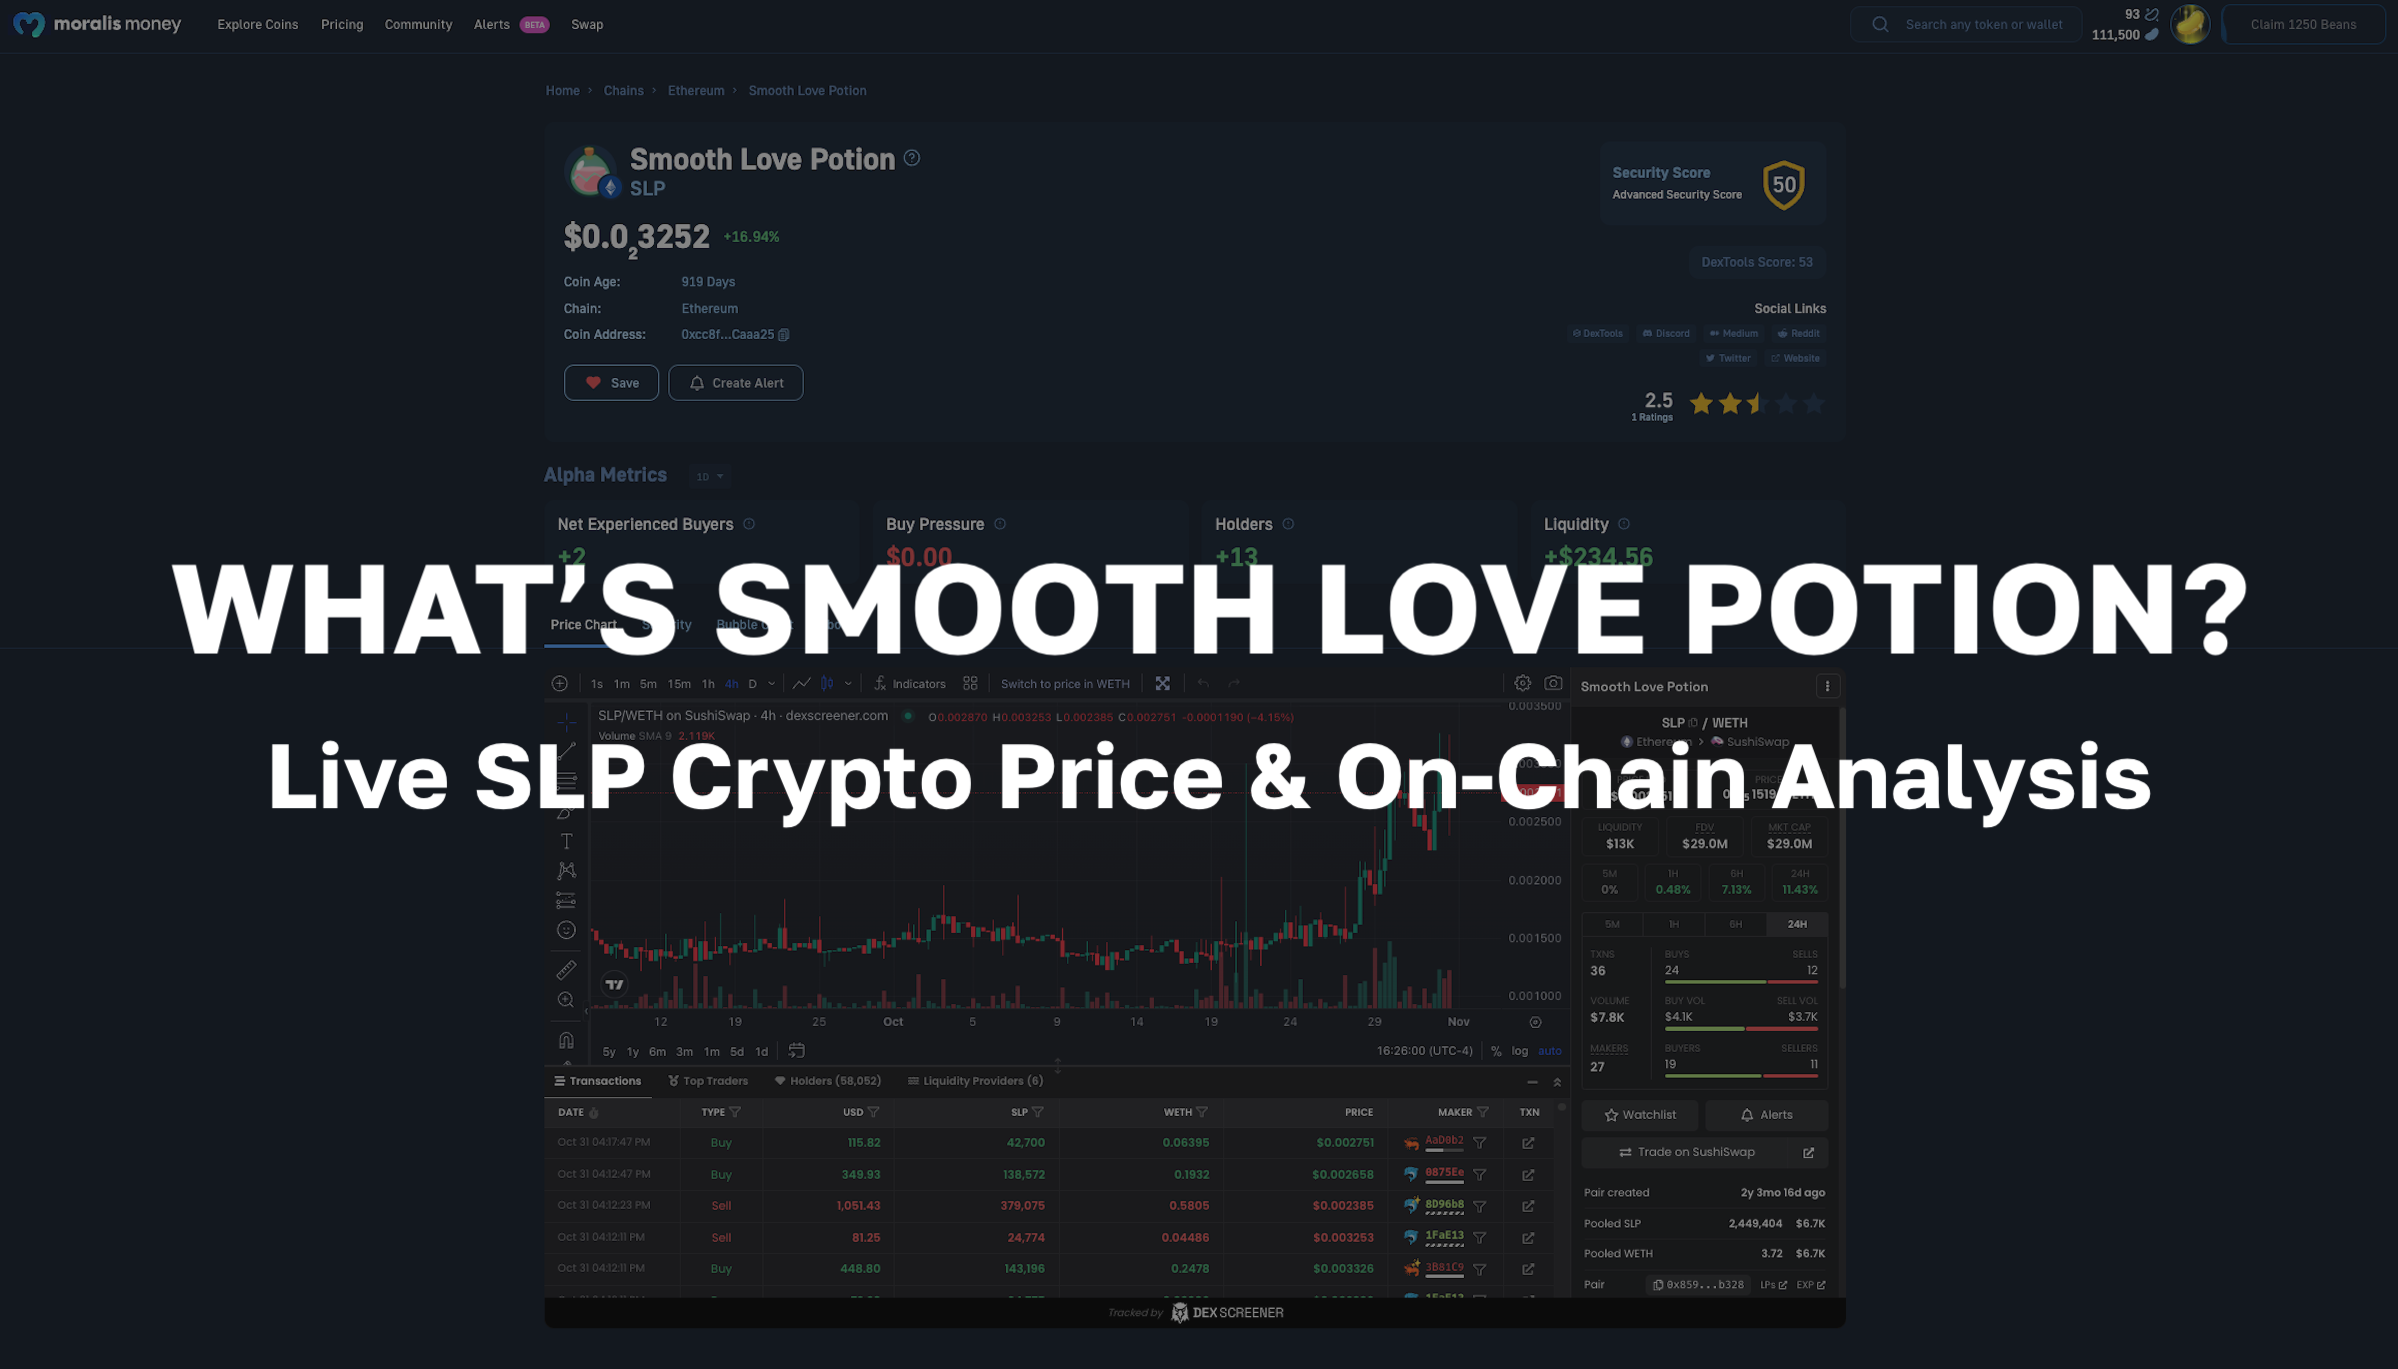 What is Smooth Love Potion? Live SLP Crypto Price & On-Chain Analysis